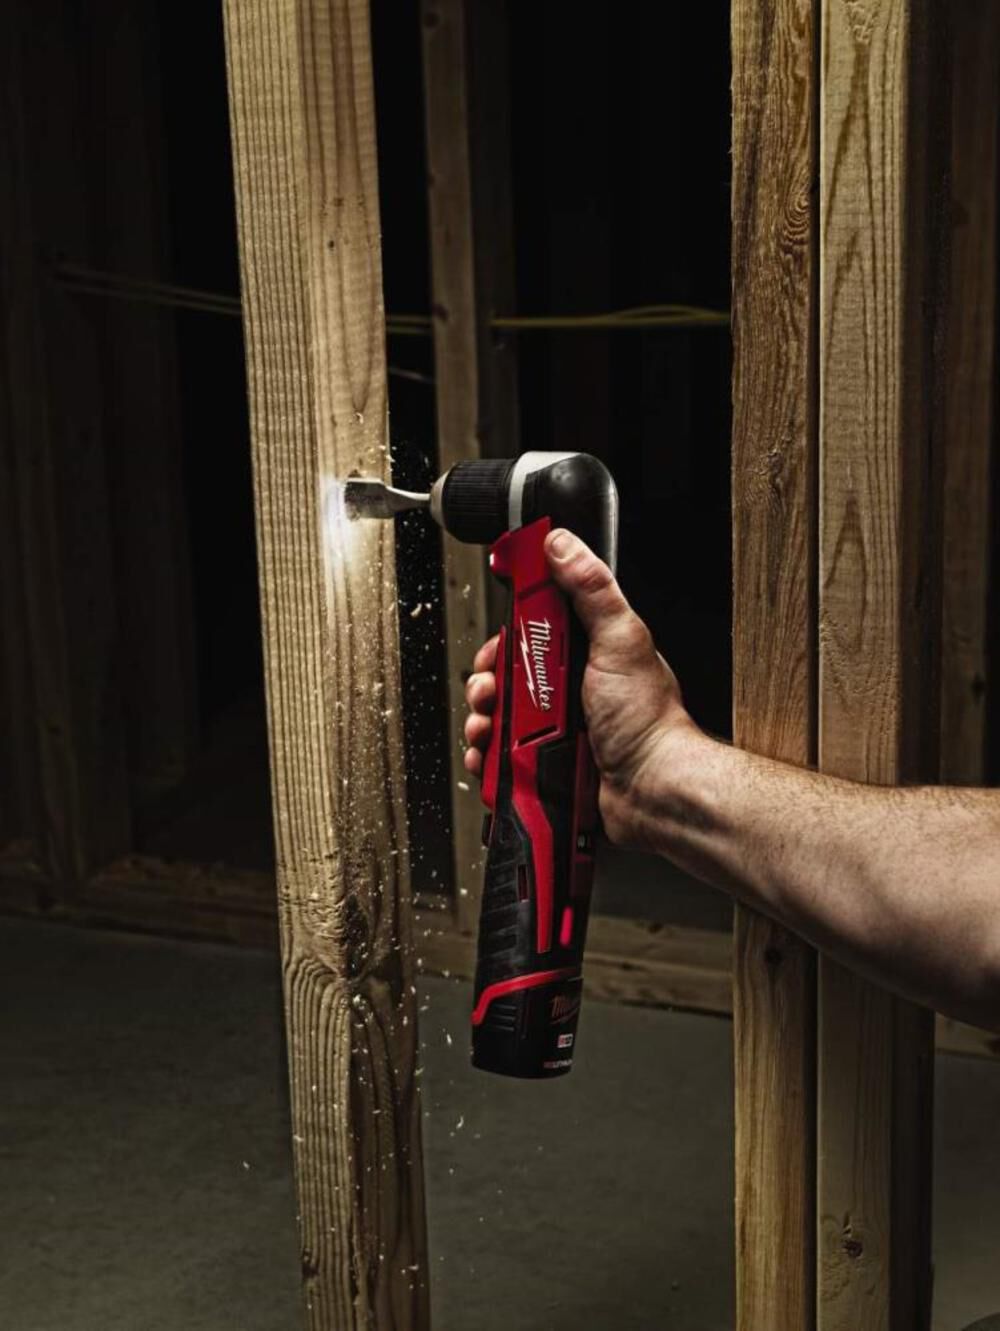 DRL-MILWAUKEE-USA M12™ Cordless 3/8” Right Angle Drill/Driver (Bare tool)